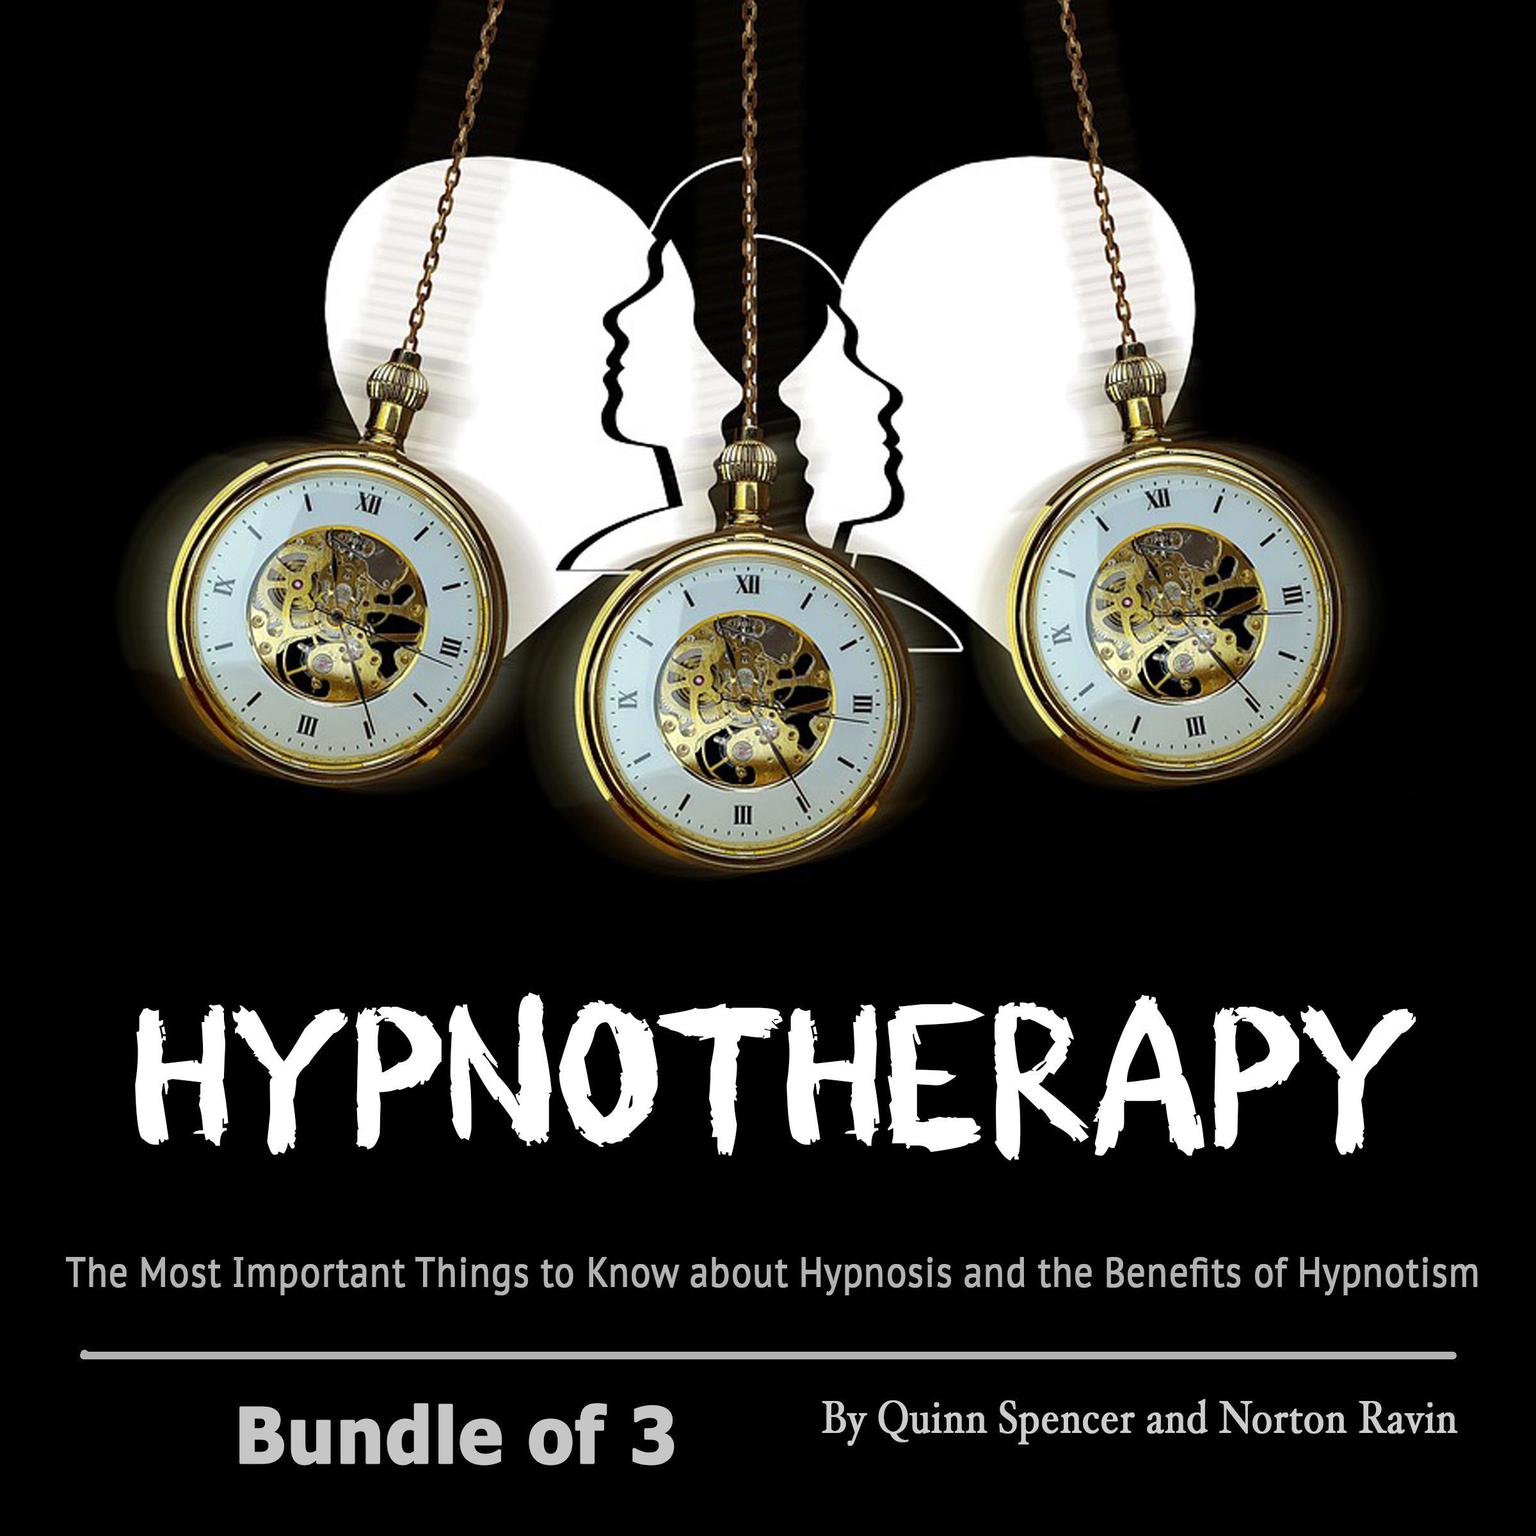 Hypnotherapy: The Most Important Things to Know about Hypnosis and the Benefits of Hypnotism: The Most Important Things to Know about Hypnosis and the Benefits of Hypnotism Audiobook, by Quinn Spencer